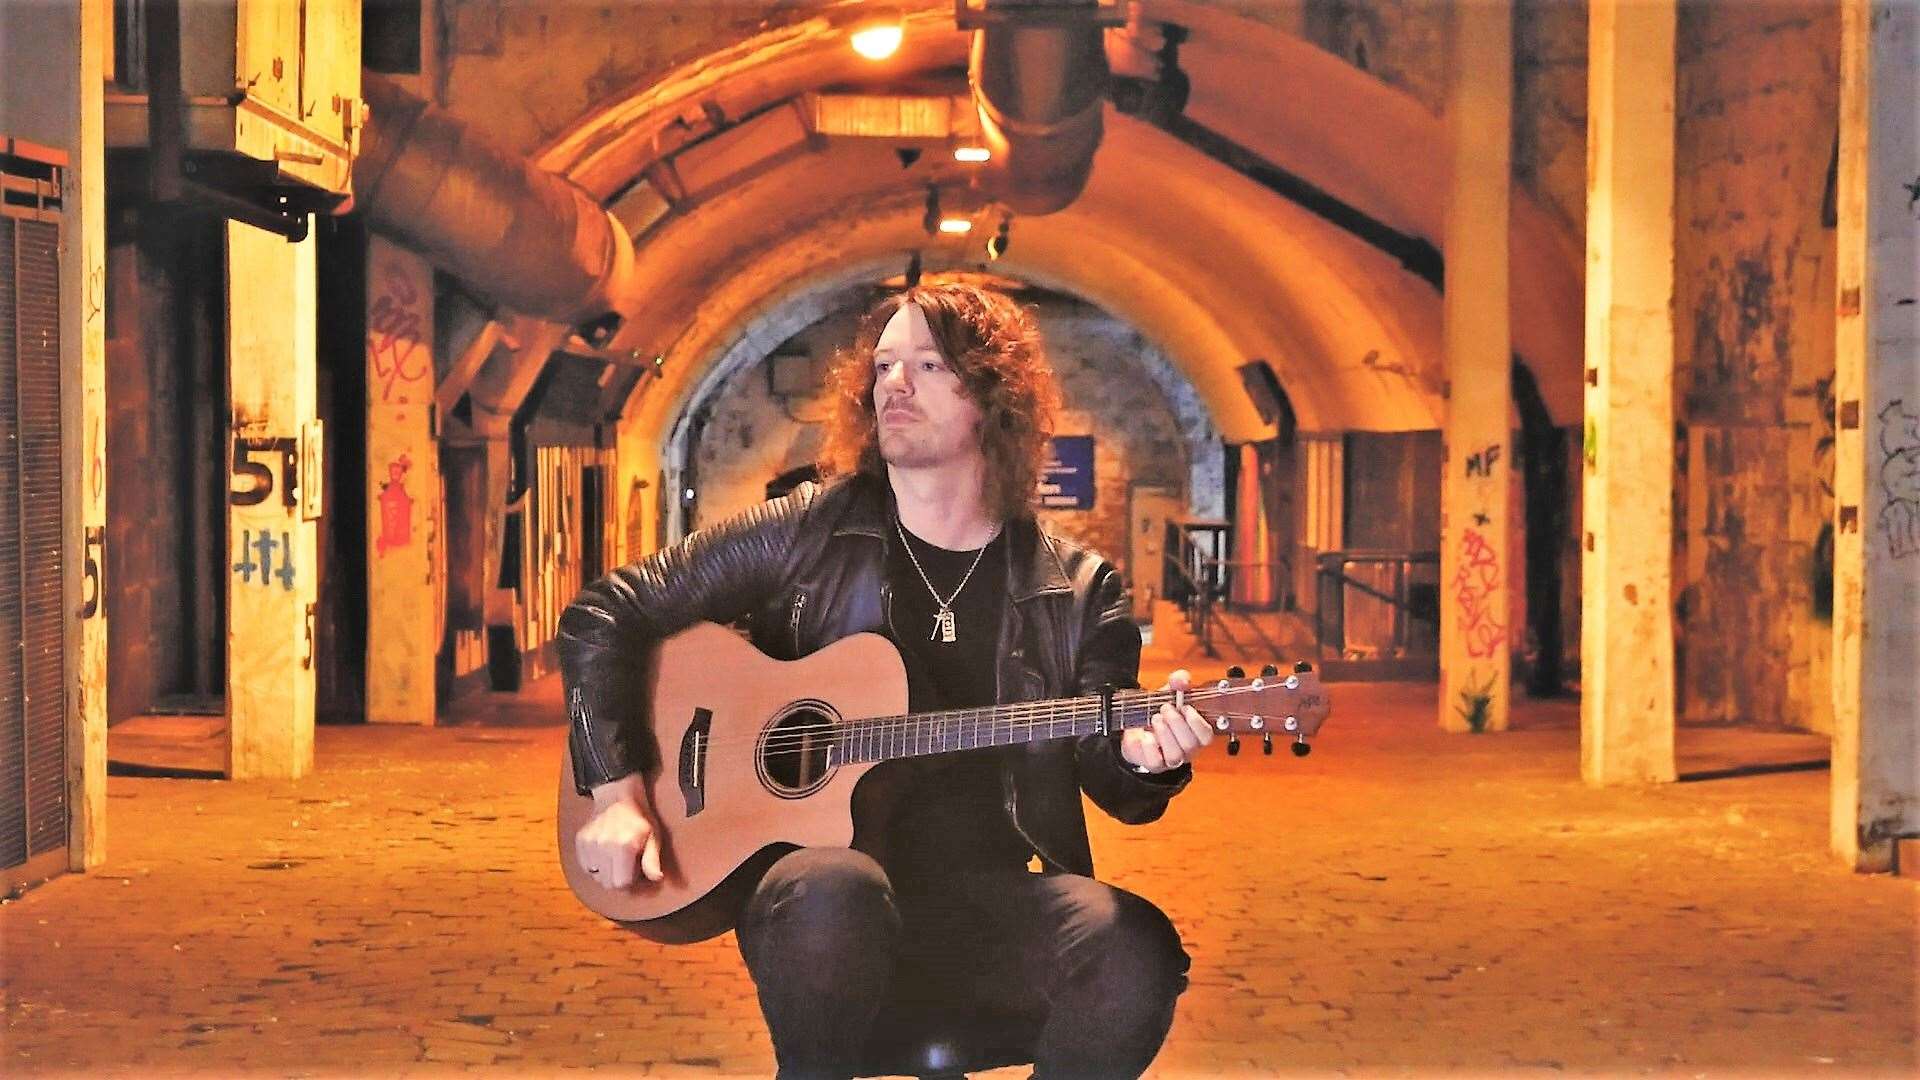 Publicity shot of Luke Gunn which was taken during the video production at the Tunnels, Aberdeen.